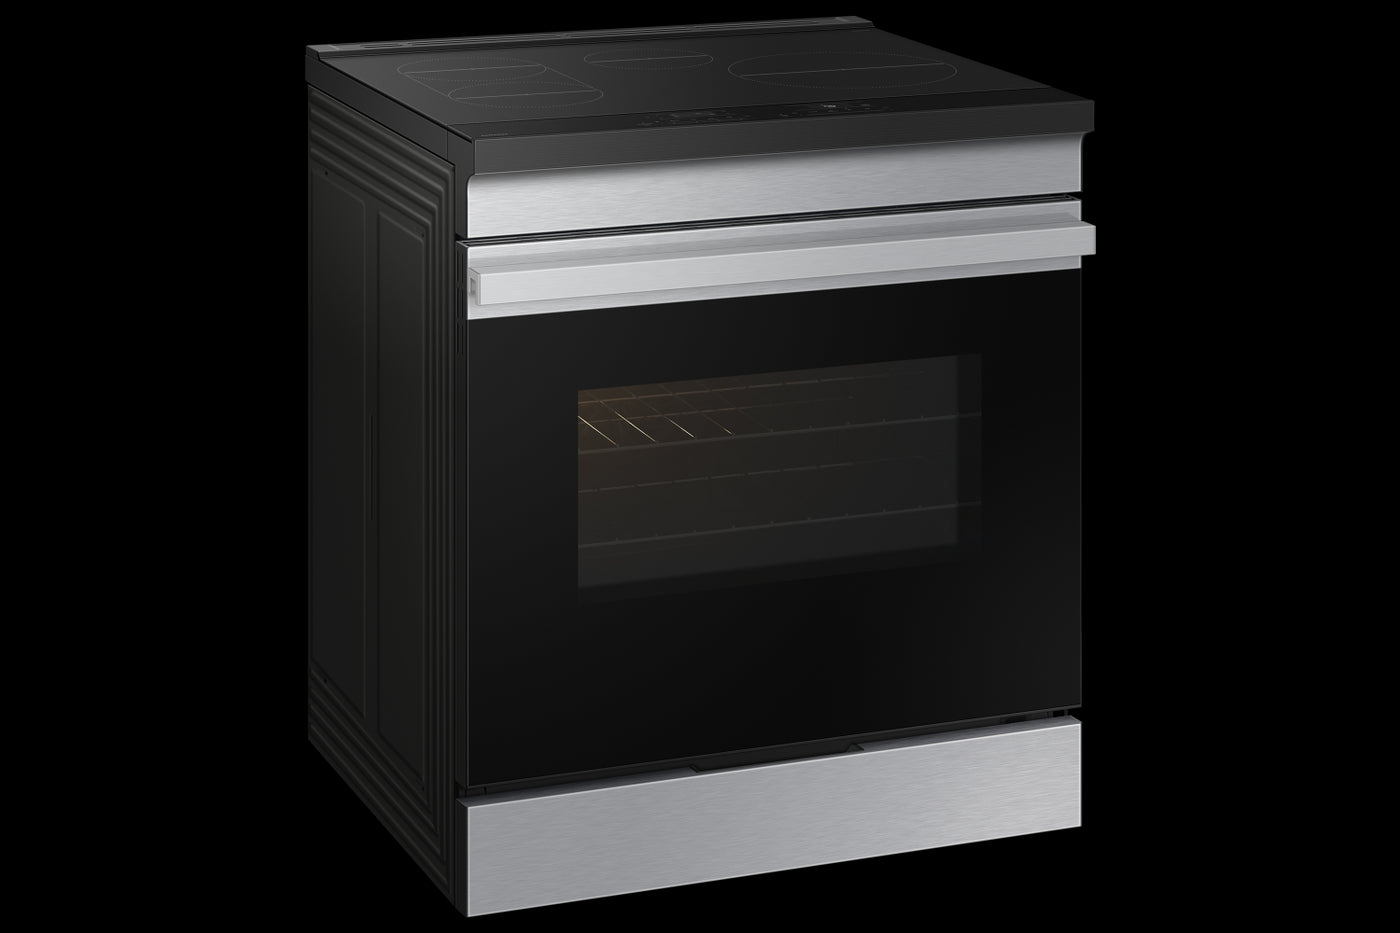 Samsung BESPOKE Stainless Steel Fan Convection Induction Slide In Range with Air Fry (6.3cu.ft.) - NSI6DG9300SRAC